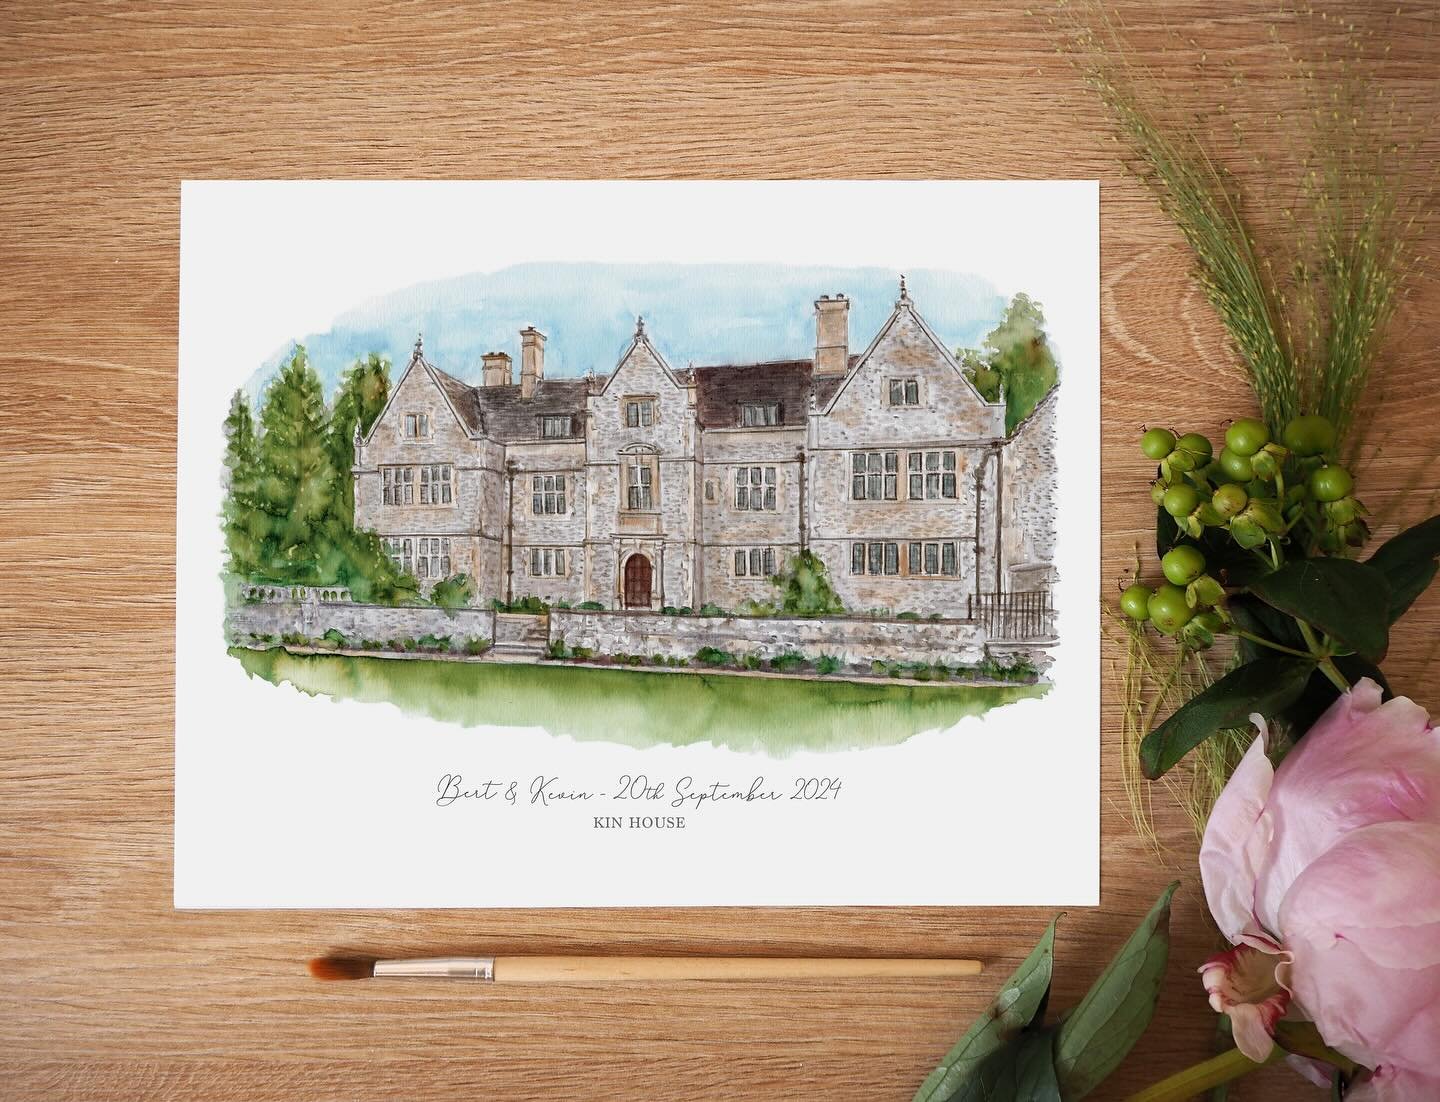 Wedding season is warming up (unlike the weather unfortunately!) and we love discovering the venues you guys pick for us to paint in your custom orders. @kinhousewiltshire looks stunning both inside and out - we really are spoilt for beautiful venues